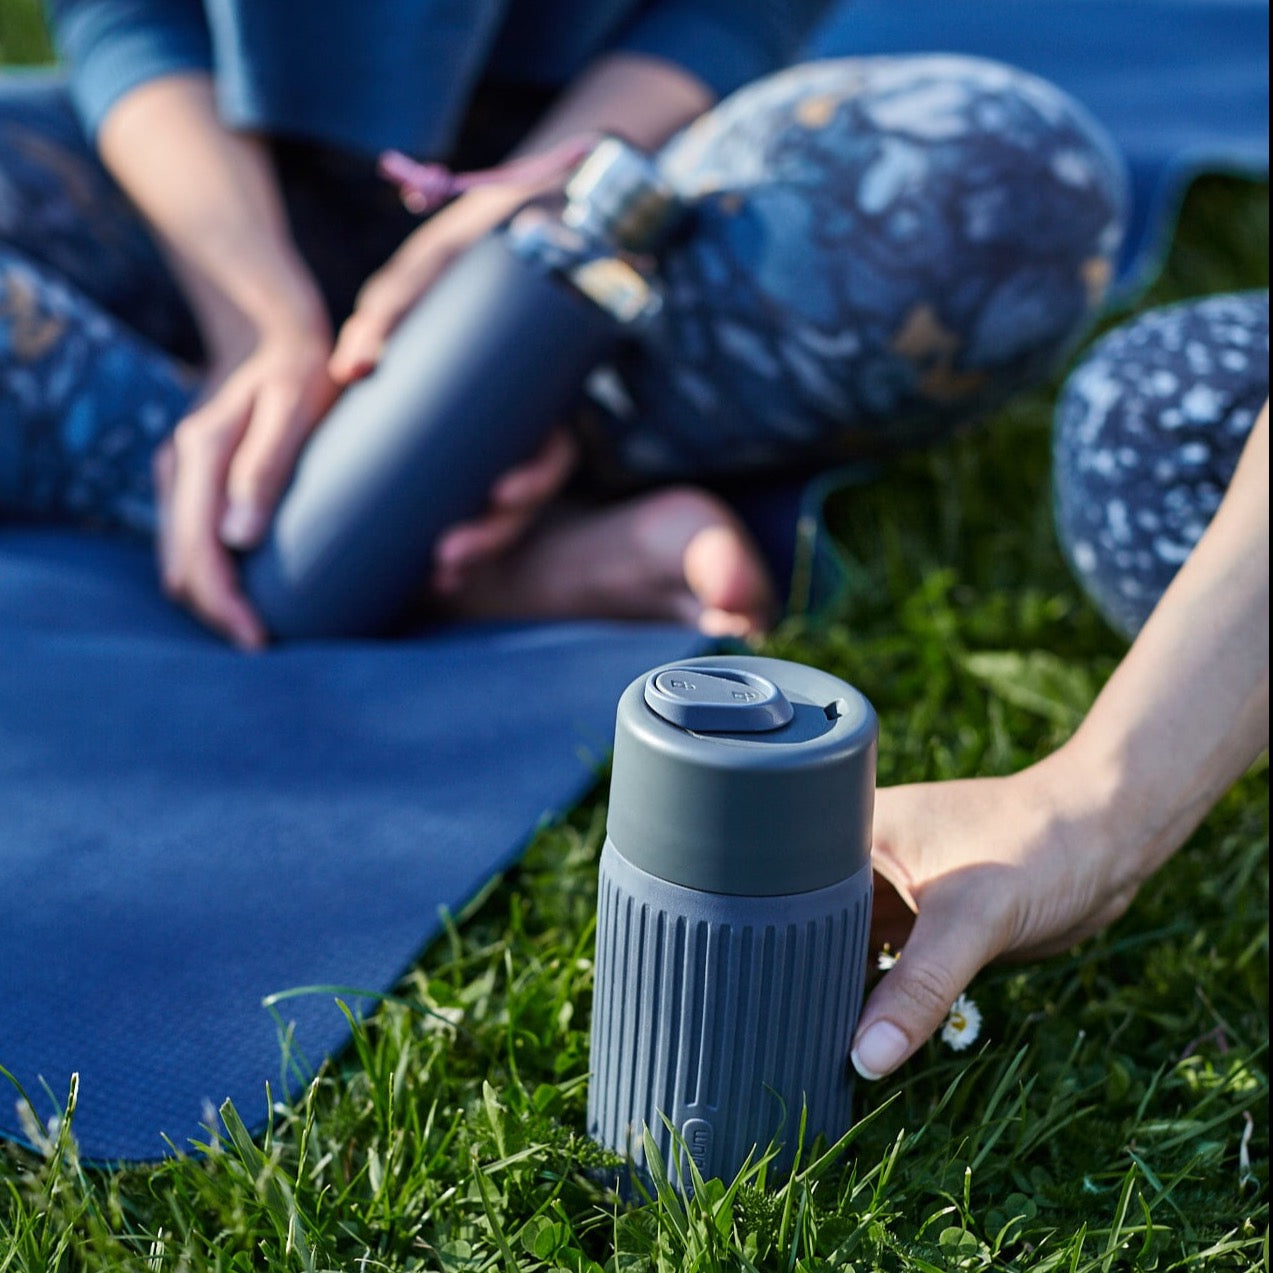 Slate colored glass travel cup being used during a picnic on the grass